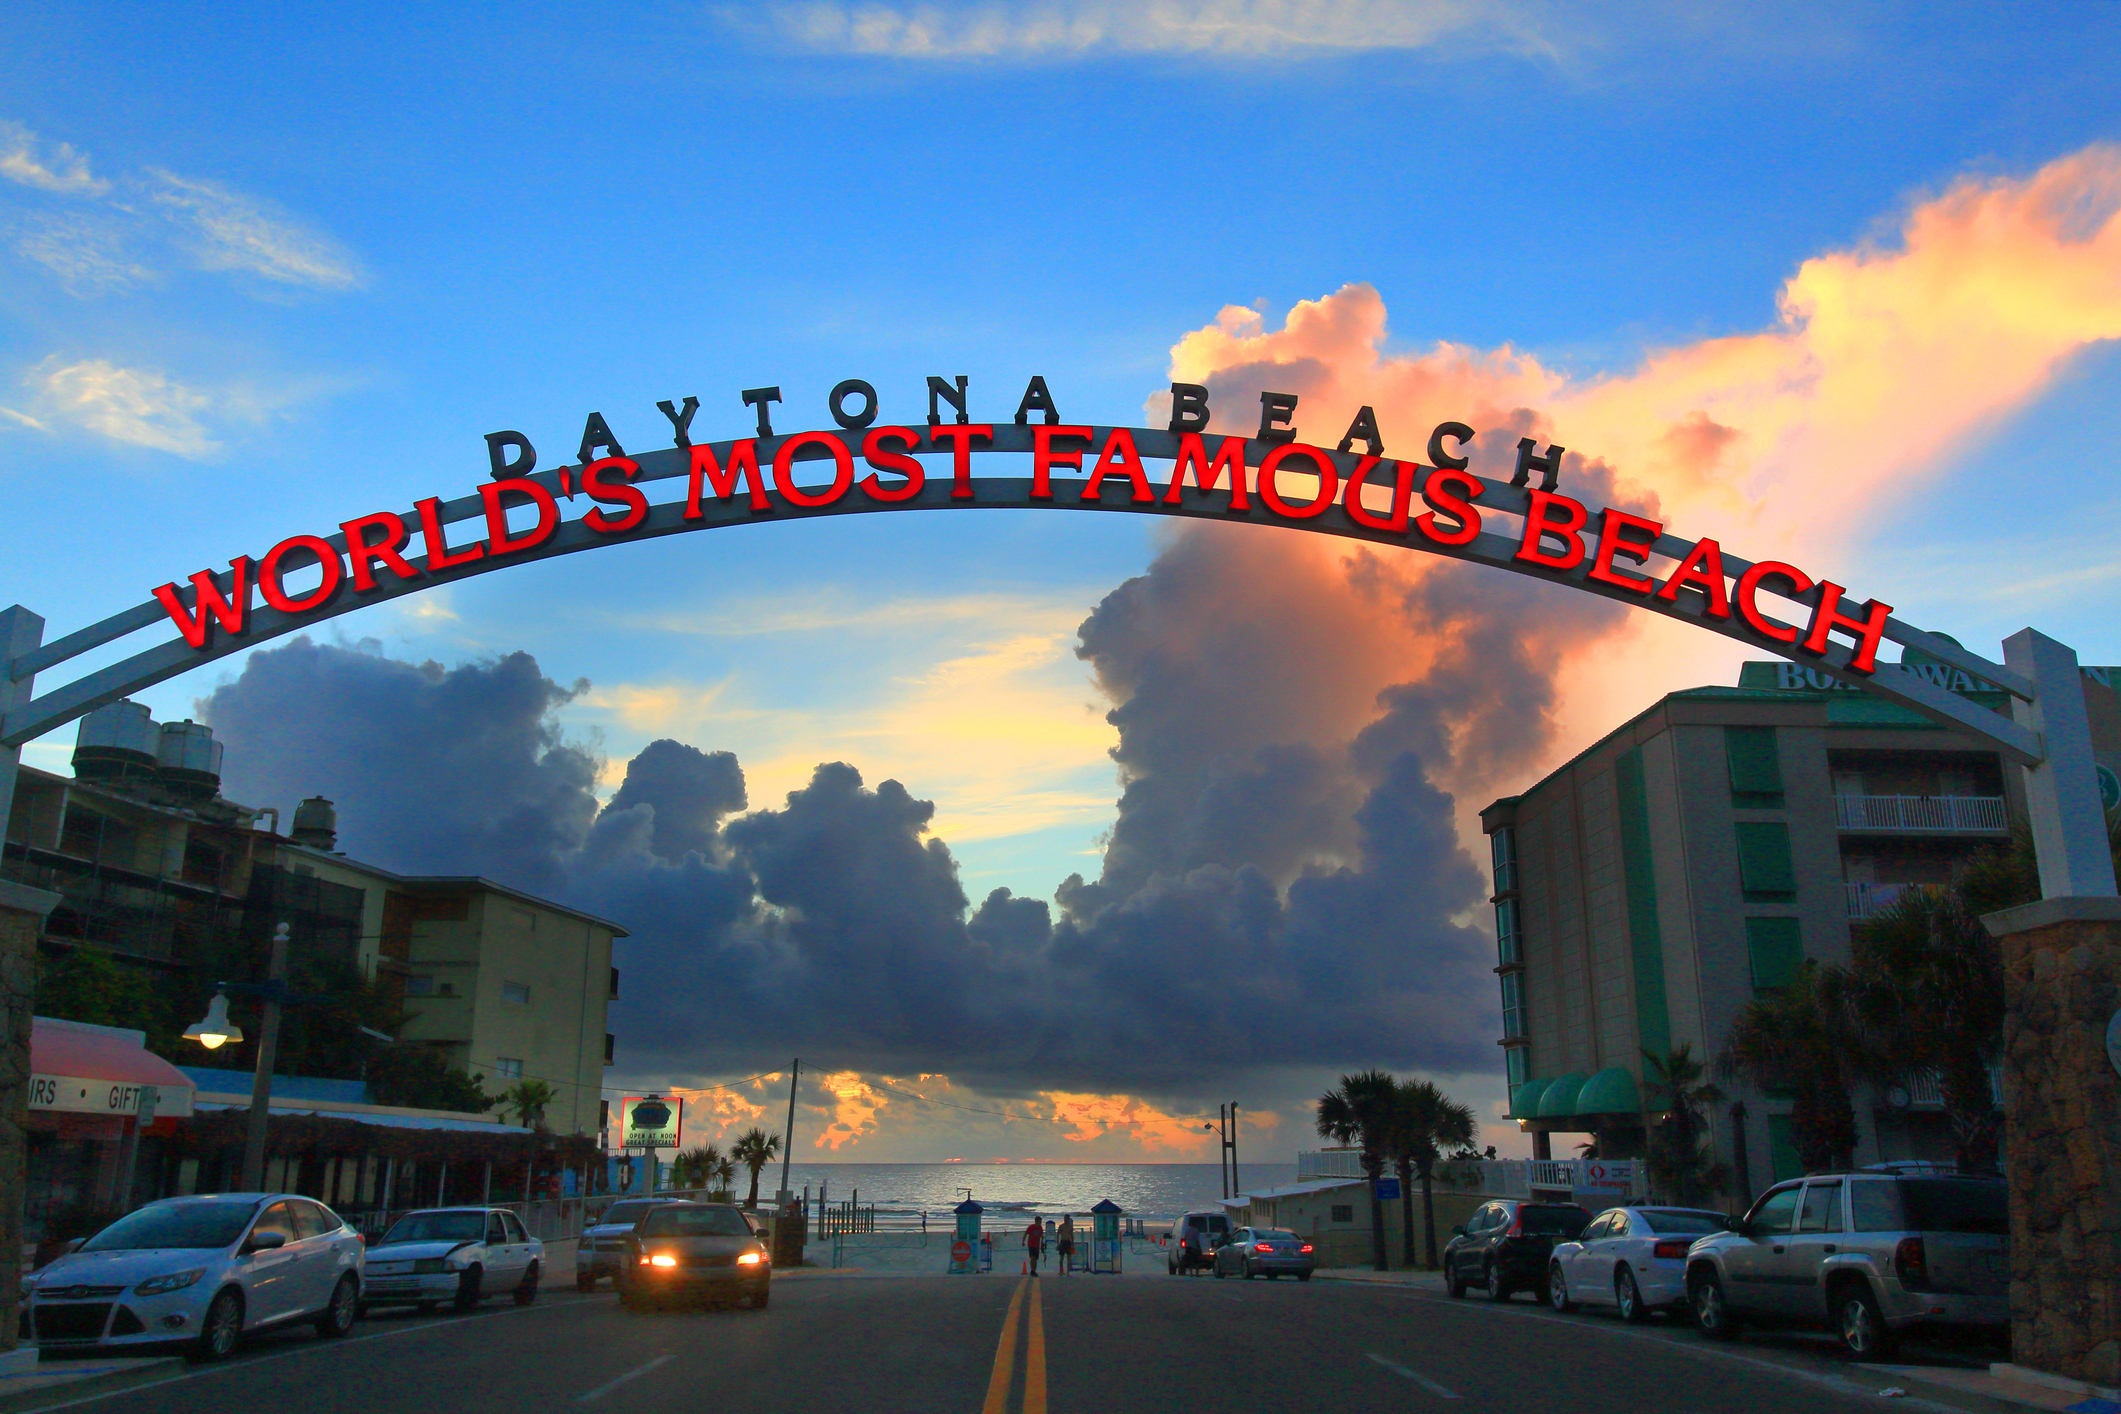 Sunset at Daytona Beach with iconic arch reading &quot;WORLD&#x27;S MOST FAMOUS BEACH&quot; over a street leading to the ocean